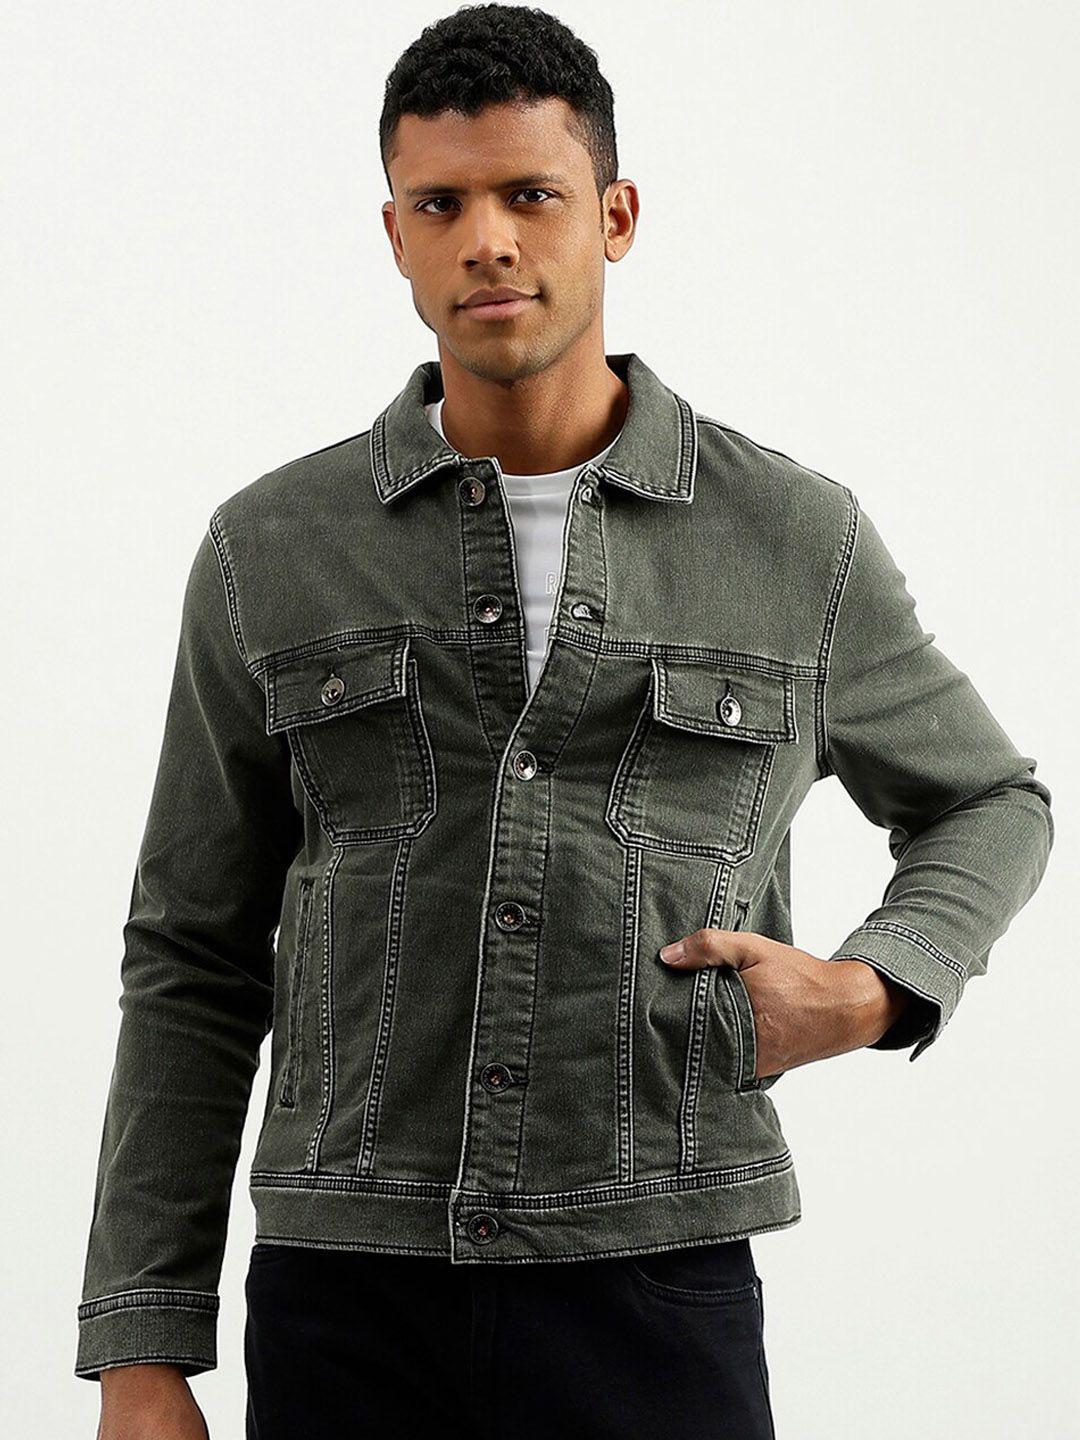 united-colors-of-benetton-men-grey-camouflage-checked-denim-jacket-with-patchwork